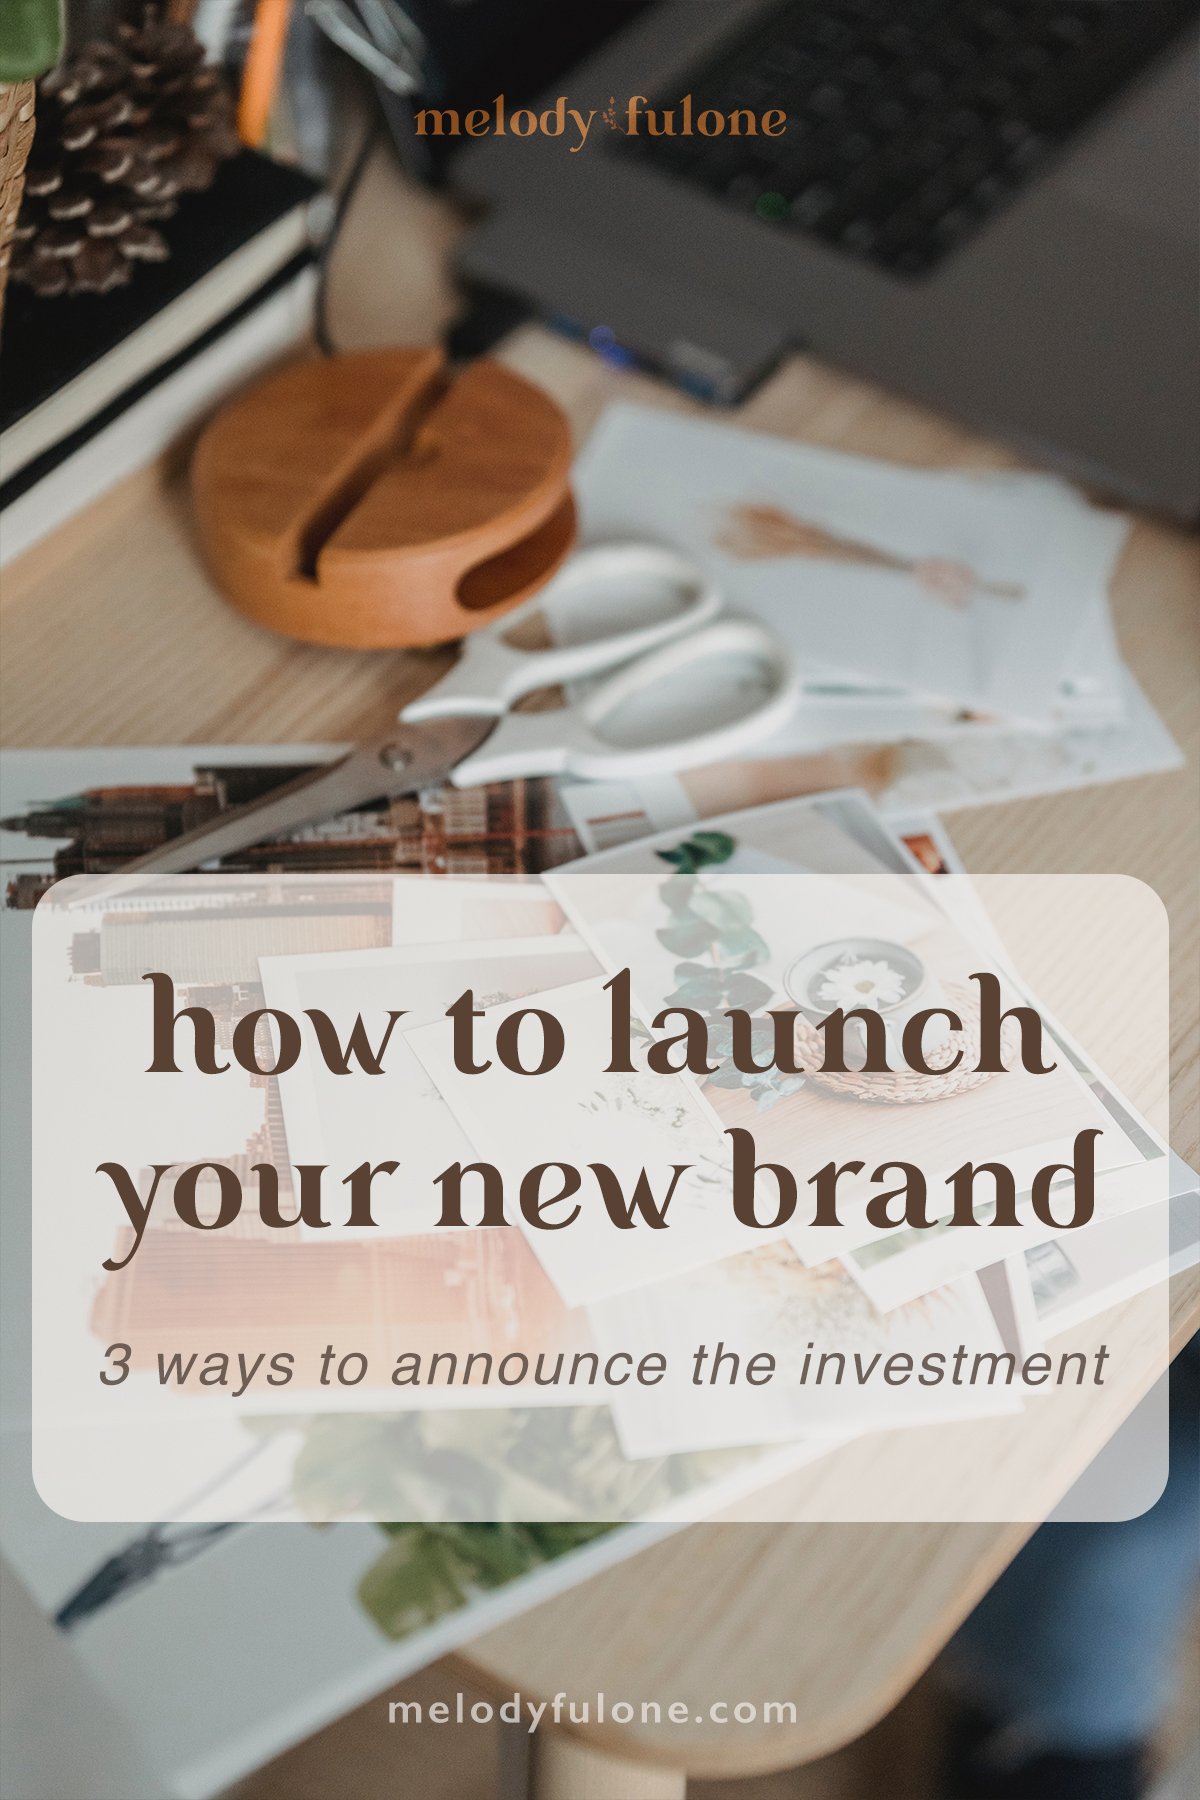 how_to_launch_brand3.jpg